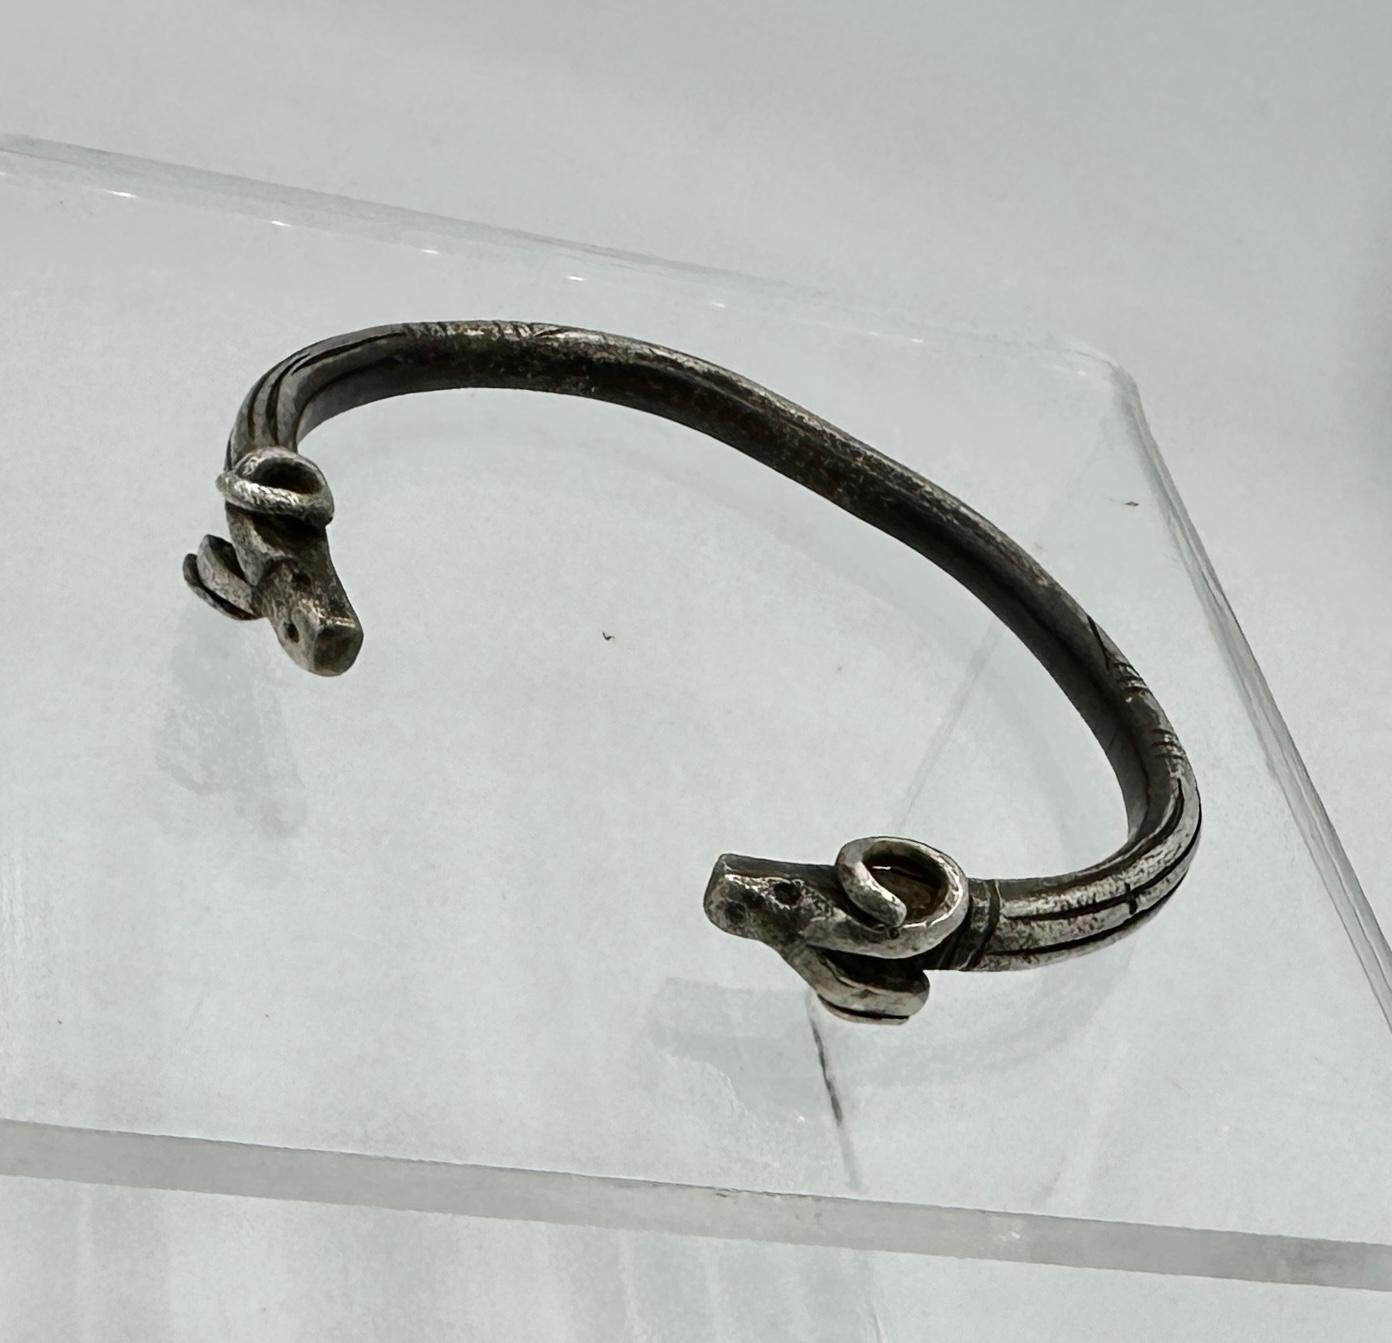 Embrace the elegance of Ancient Greece with this exquisite Museum Quality Silver Bracelet from the 4th century BC, featuring Rams Head terminals.  A Certificate of Authenticity is available. We see the form of Ram Head bracelets used to this day in